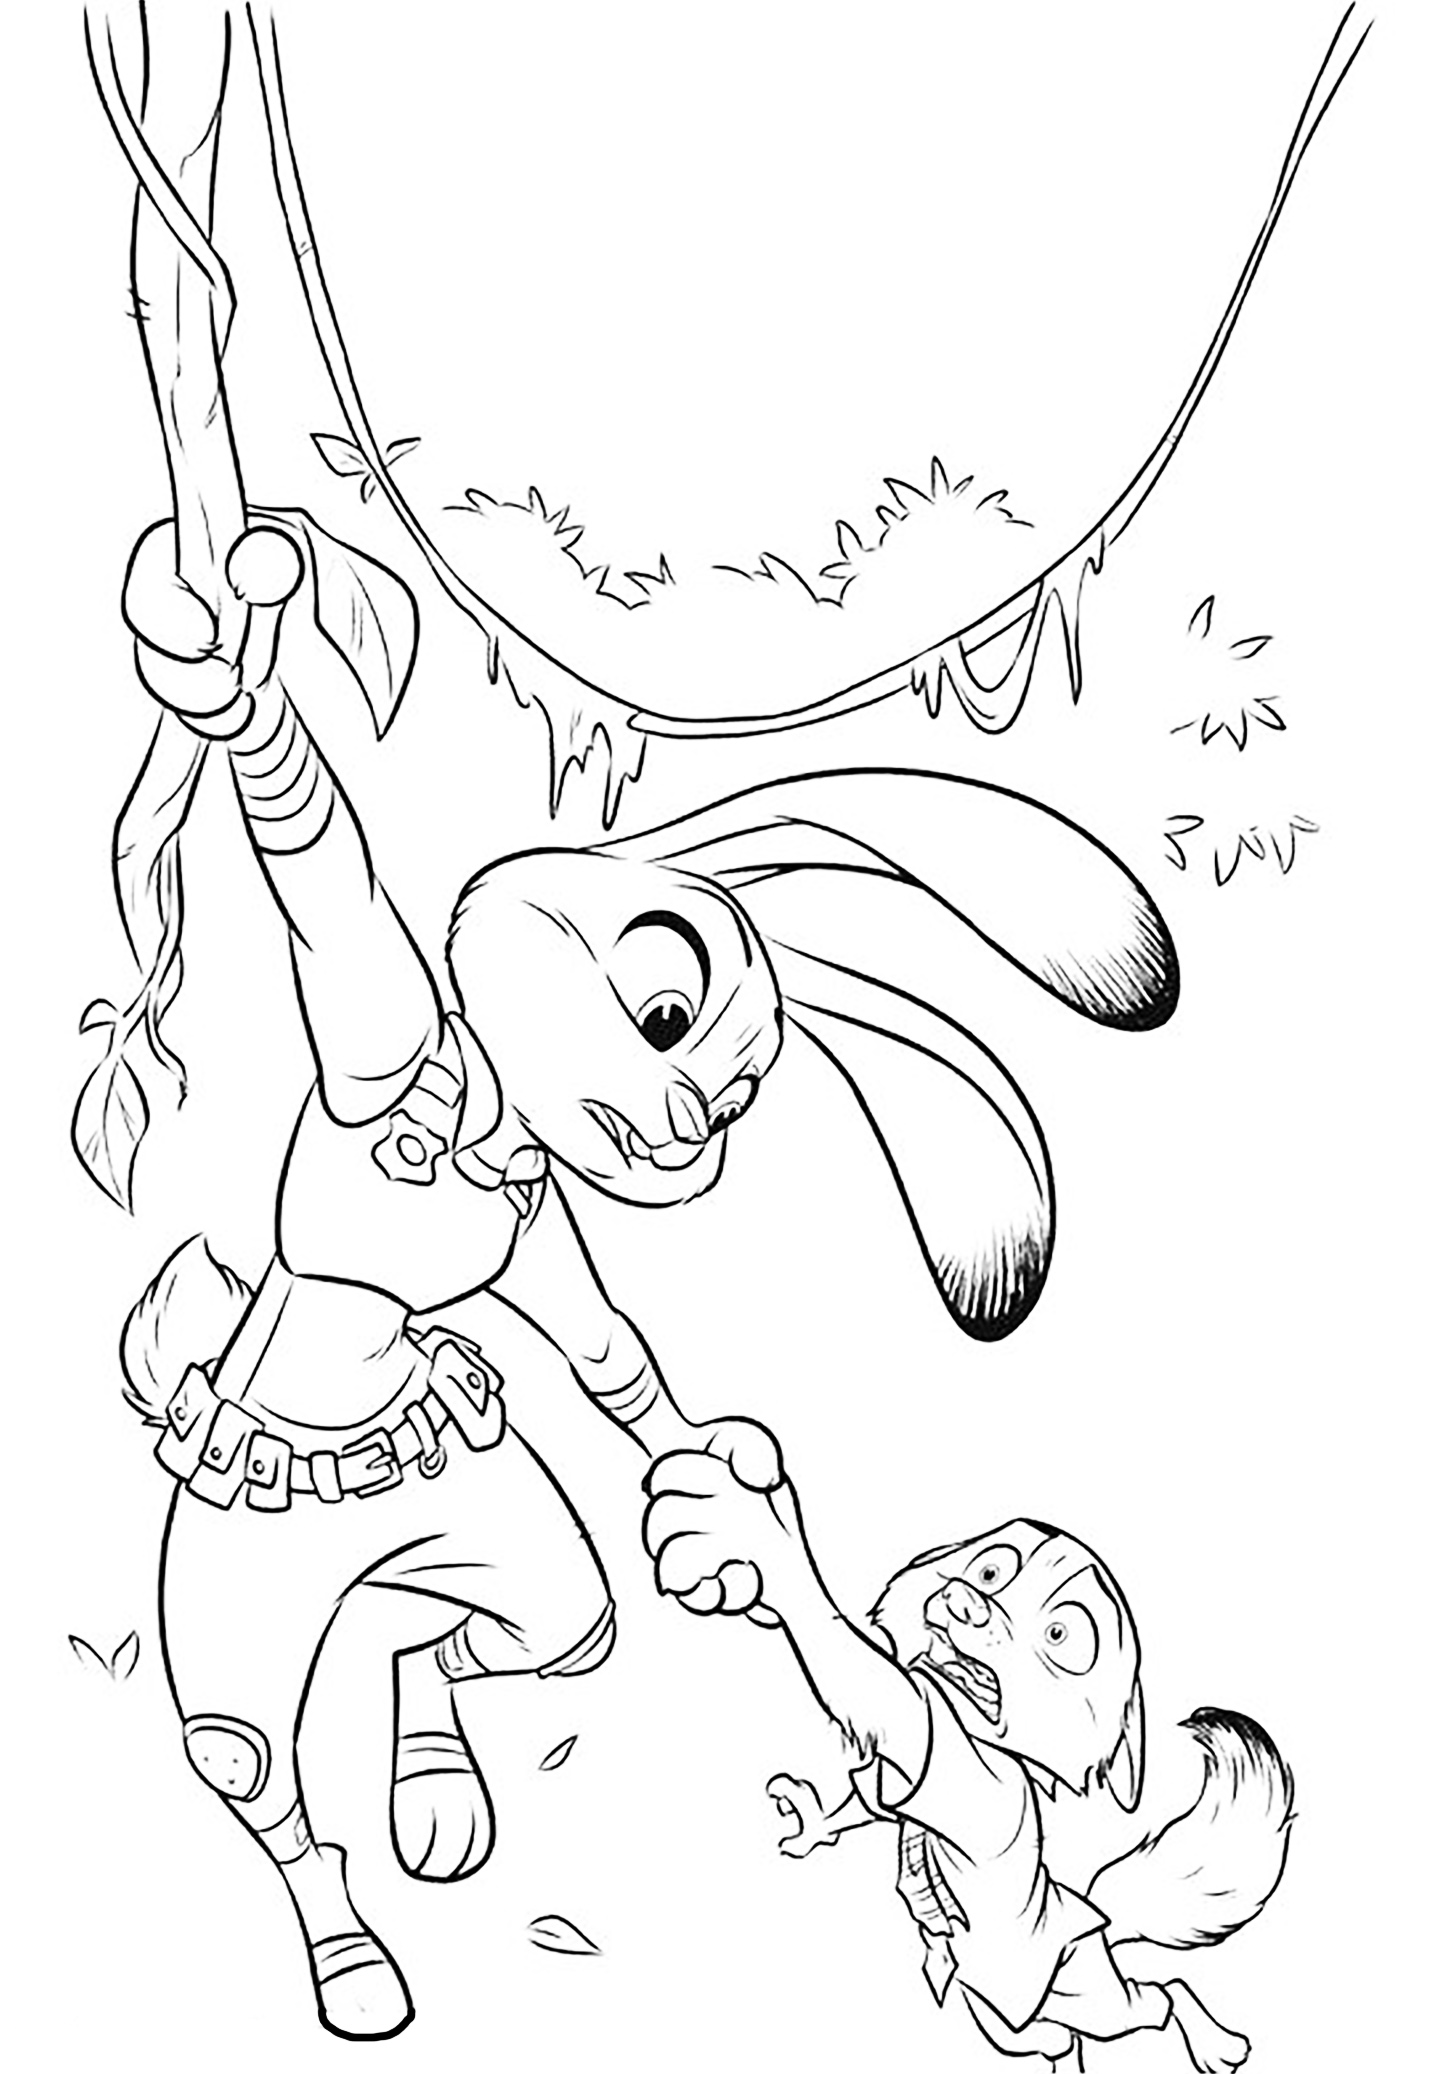 Zootopia free to color for kids